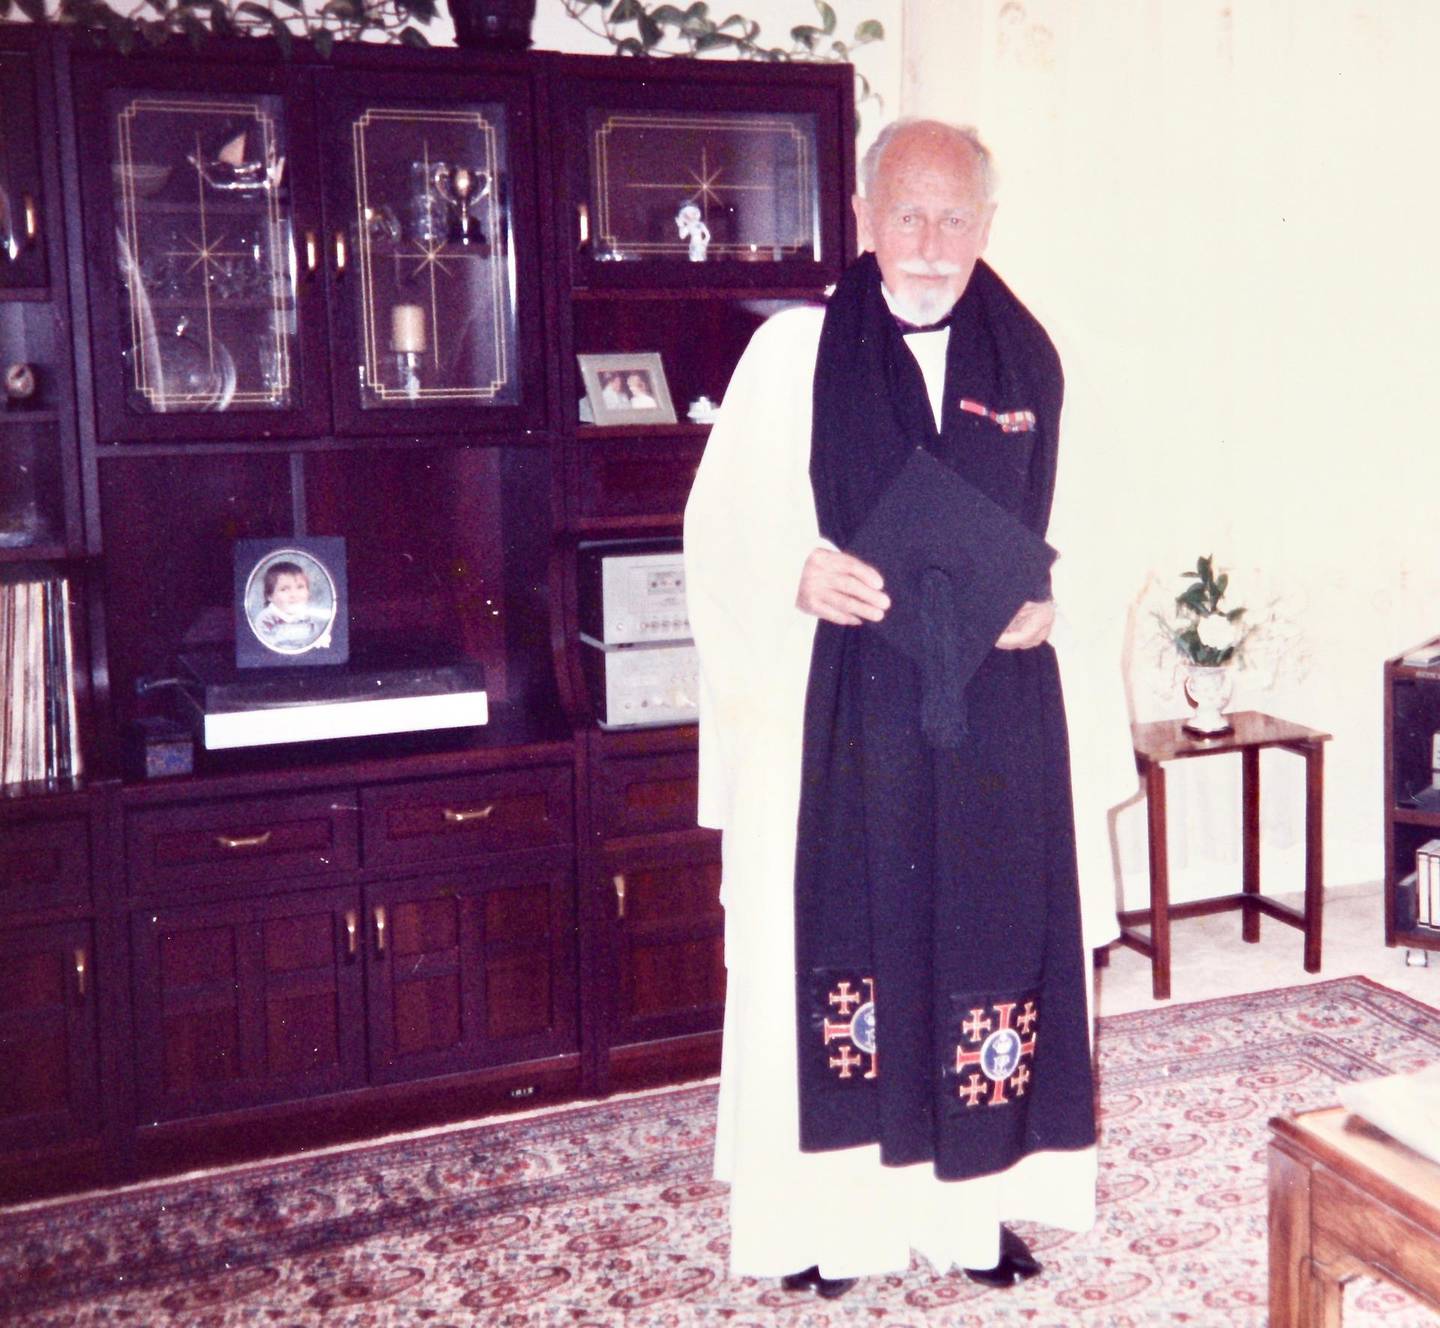 The Rev Alun Morris, vicar of St Christopher's in Bahrain who conducted the first Christian service in Abu Dahbi in December 1957 The photo was taken in 1987, near the end of his time in the Arabian Gulf. Photo: Alun Morris